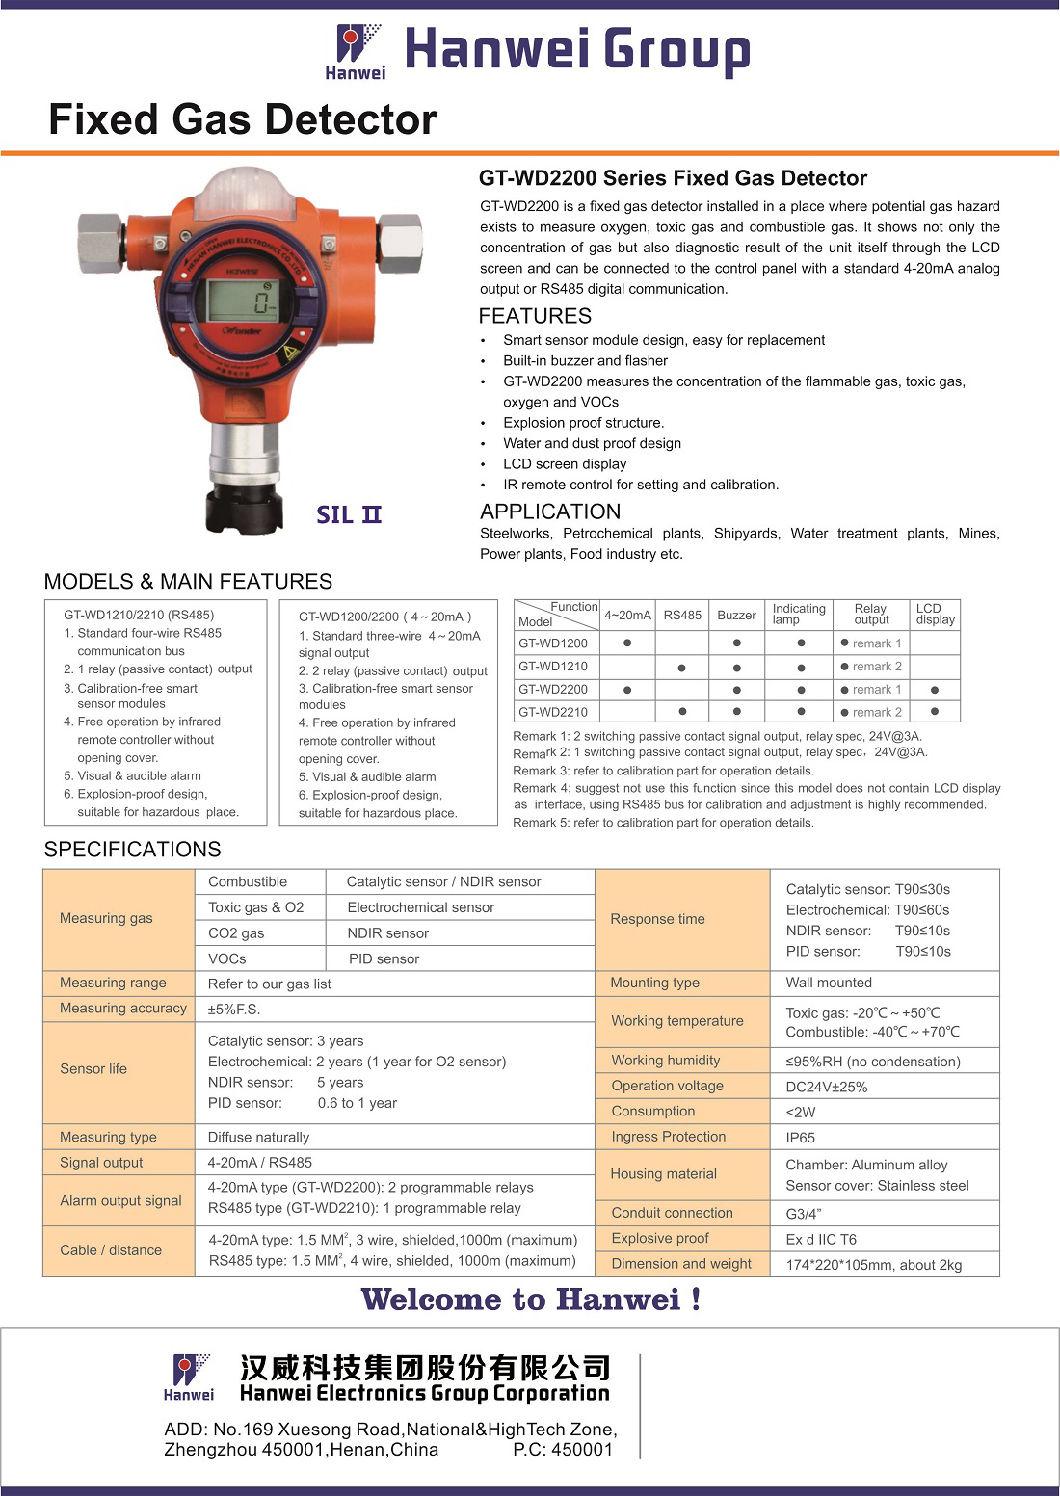 Fixed Gas Leak Detector with Replaceable Sensor and Range of 0-100%Lel for CH4 Gas Leak Detecting